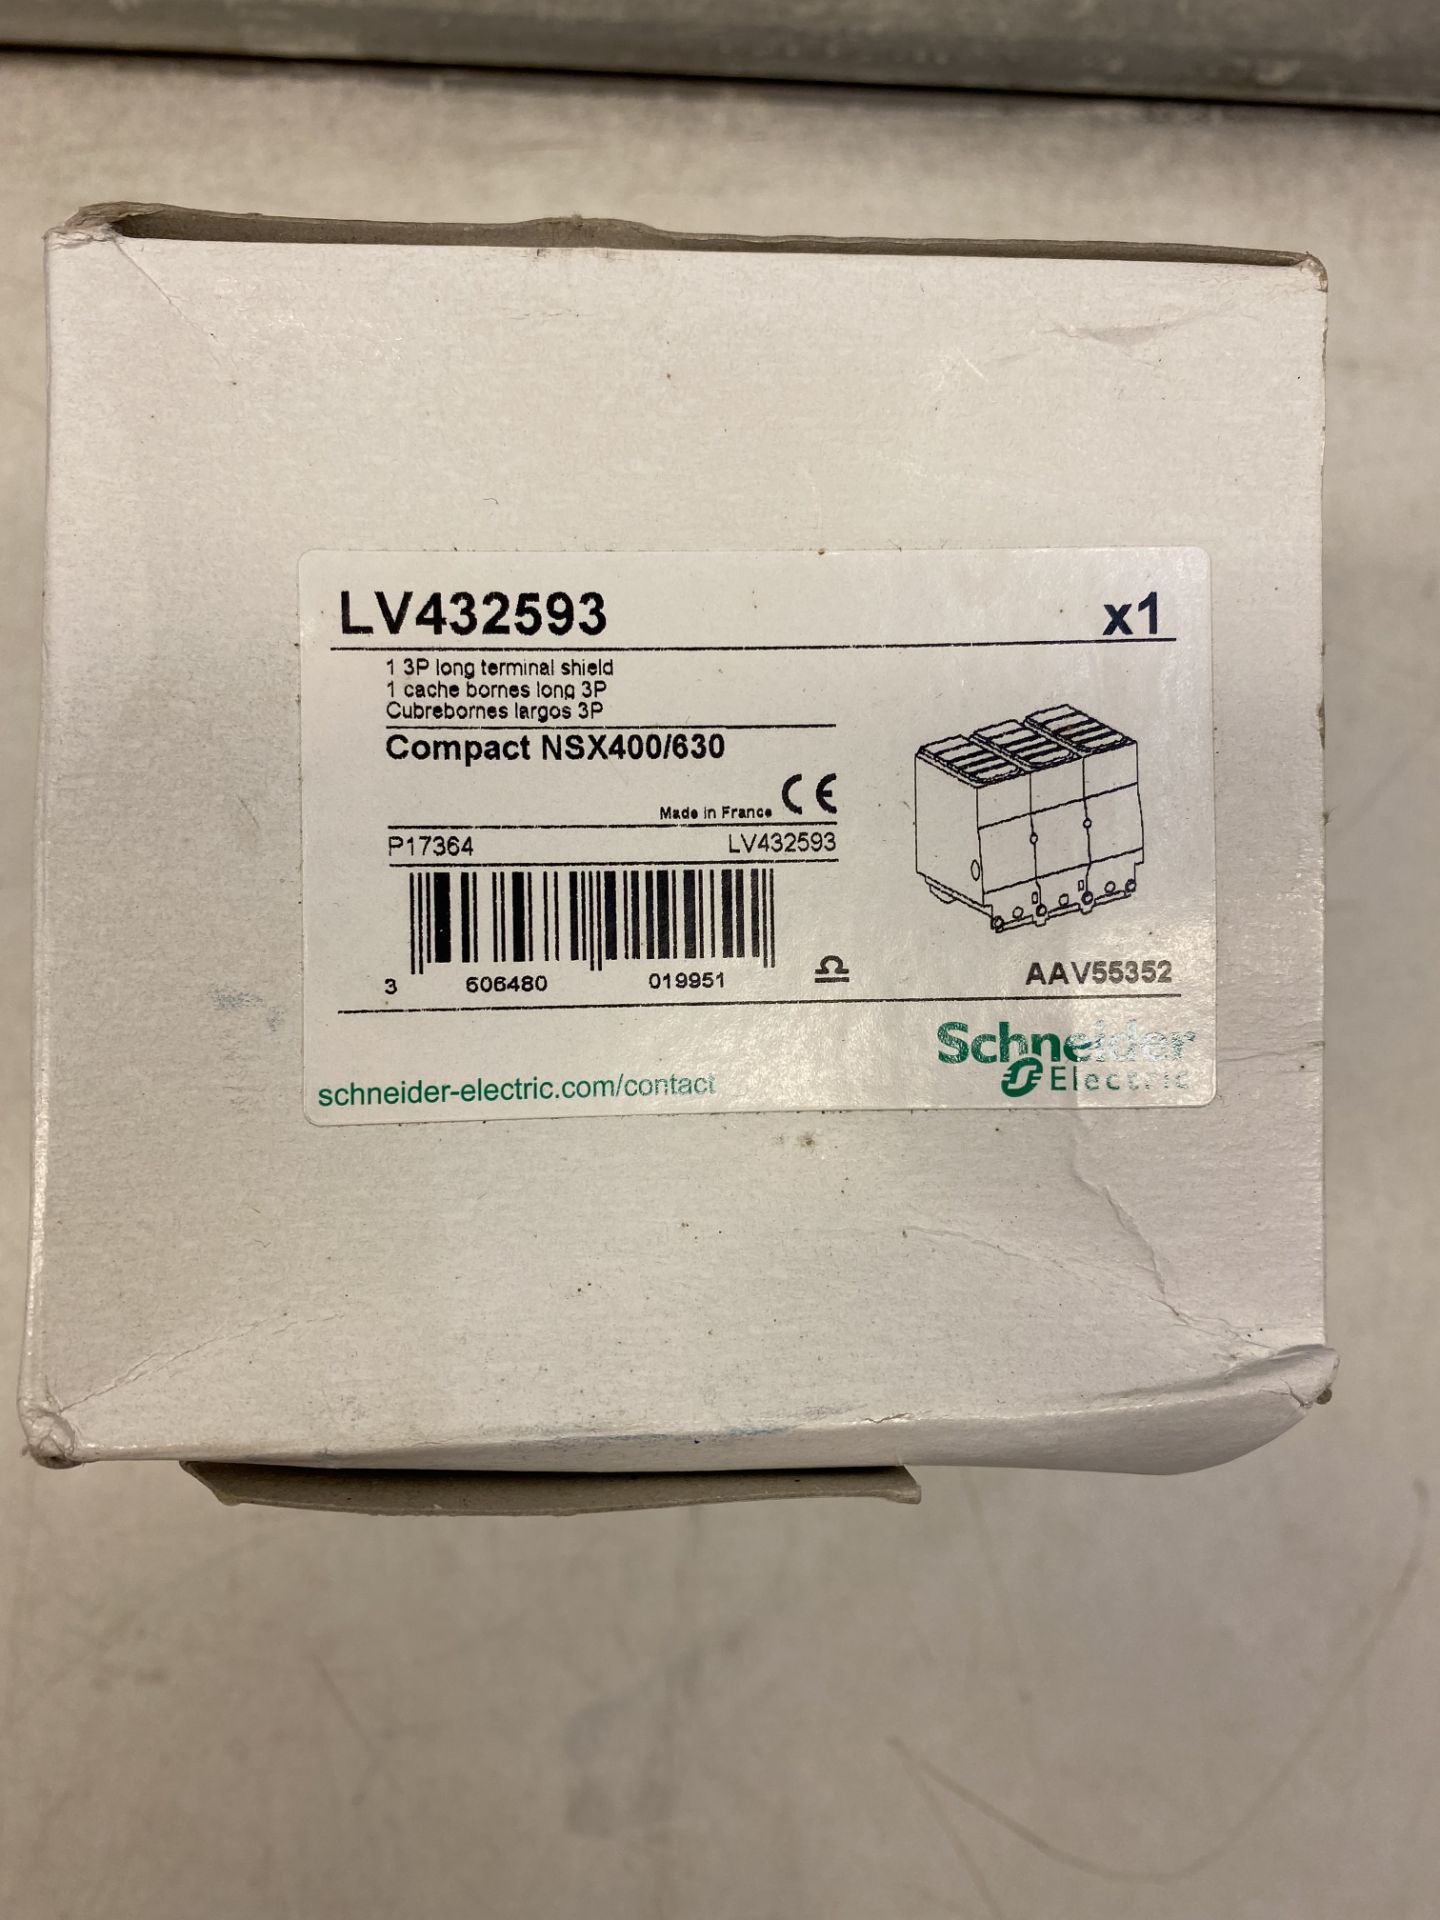 6 x Schneider Electric Klemmenabdeckung LV432593 Phase Separation for Power Switch 3606480019951 - Image 2 of 2